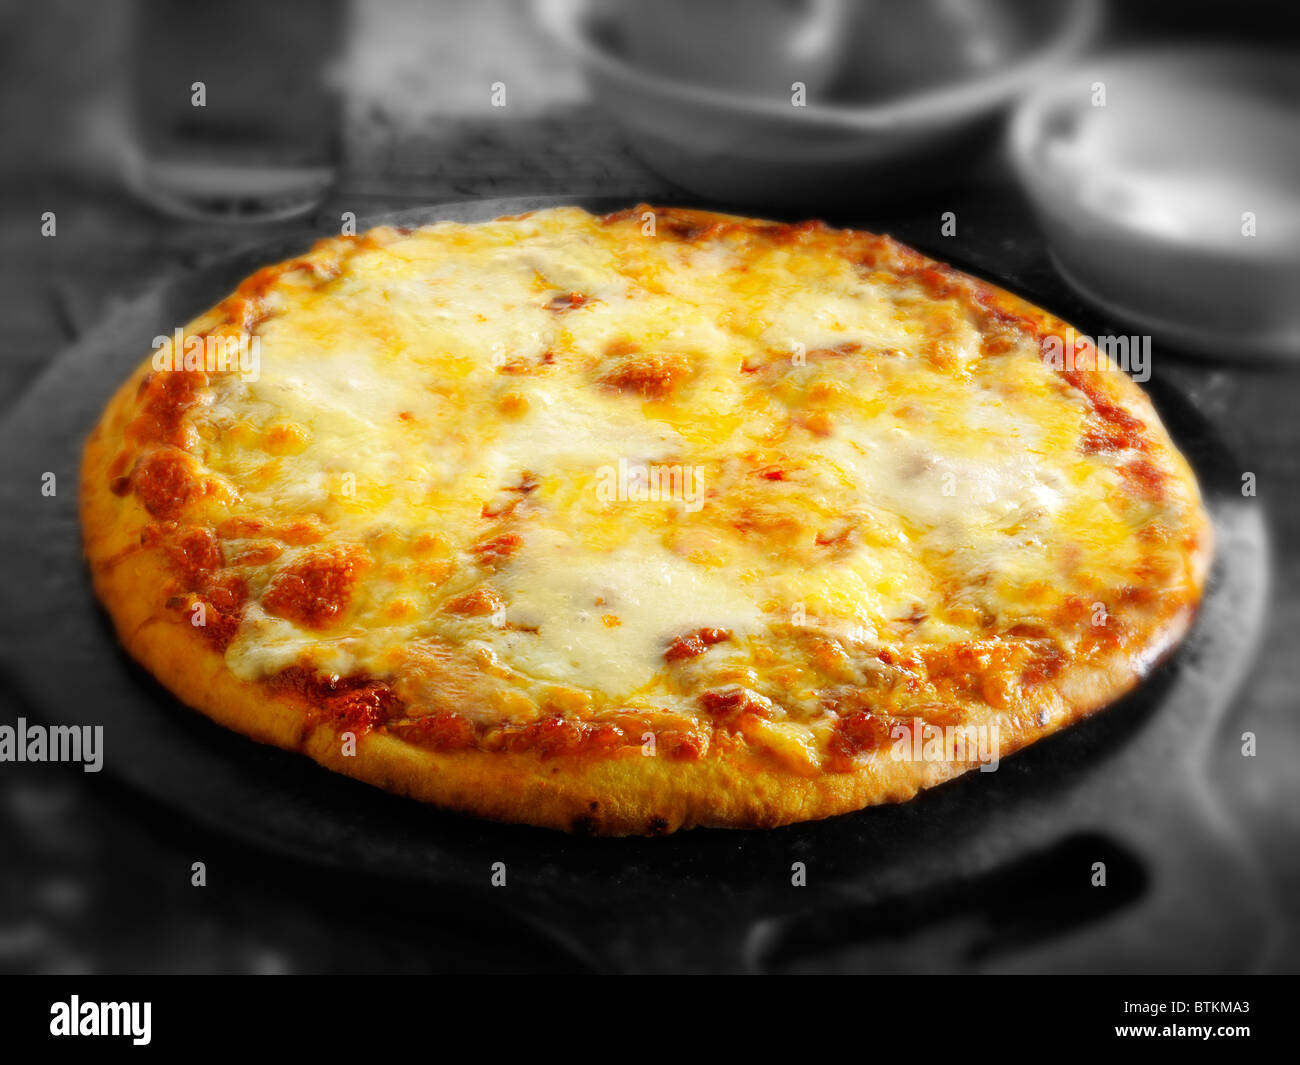 Whole Cheese and Tomato thin crust pizza Stock Photo